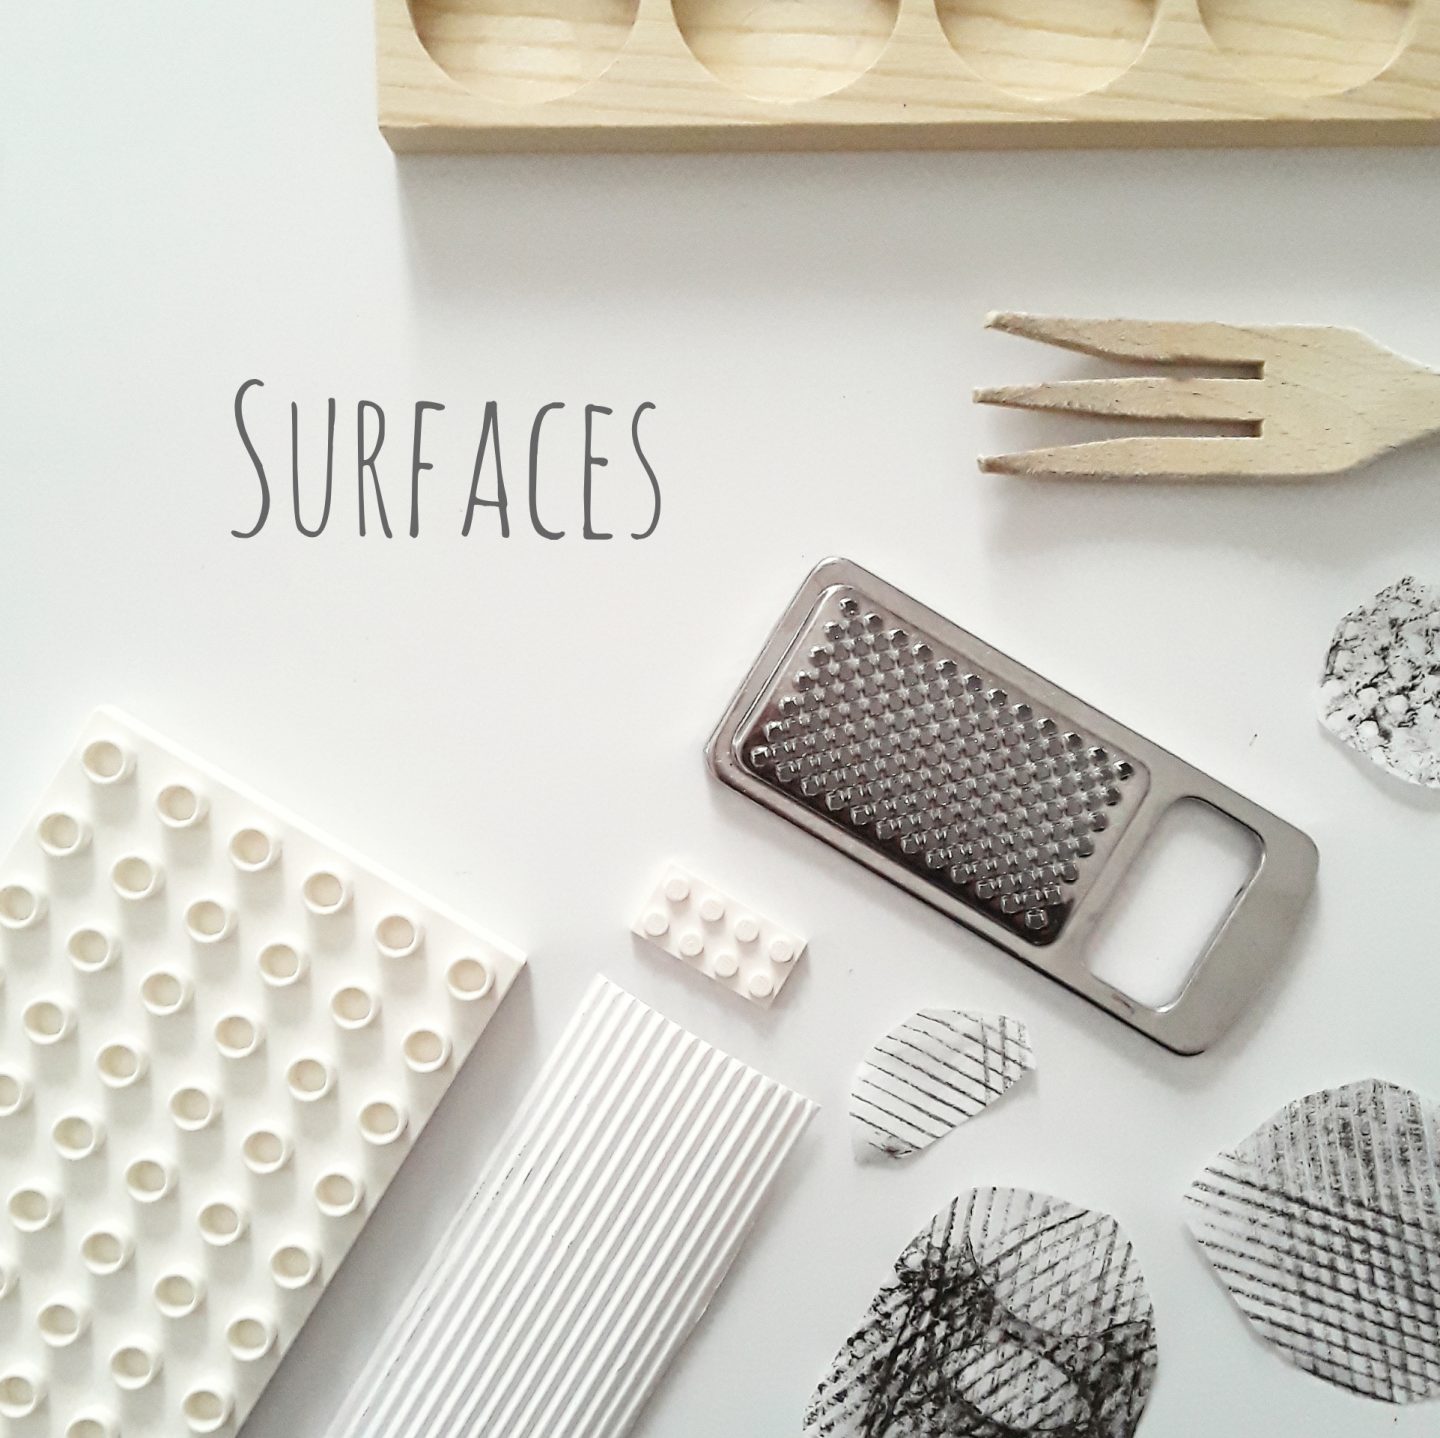 Kids art projects: Make rubbings from surfaces